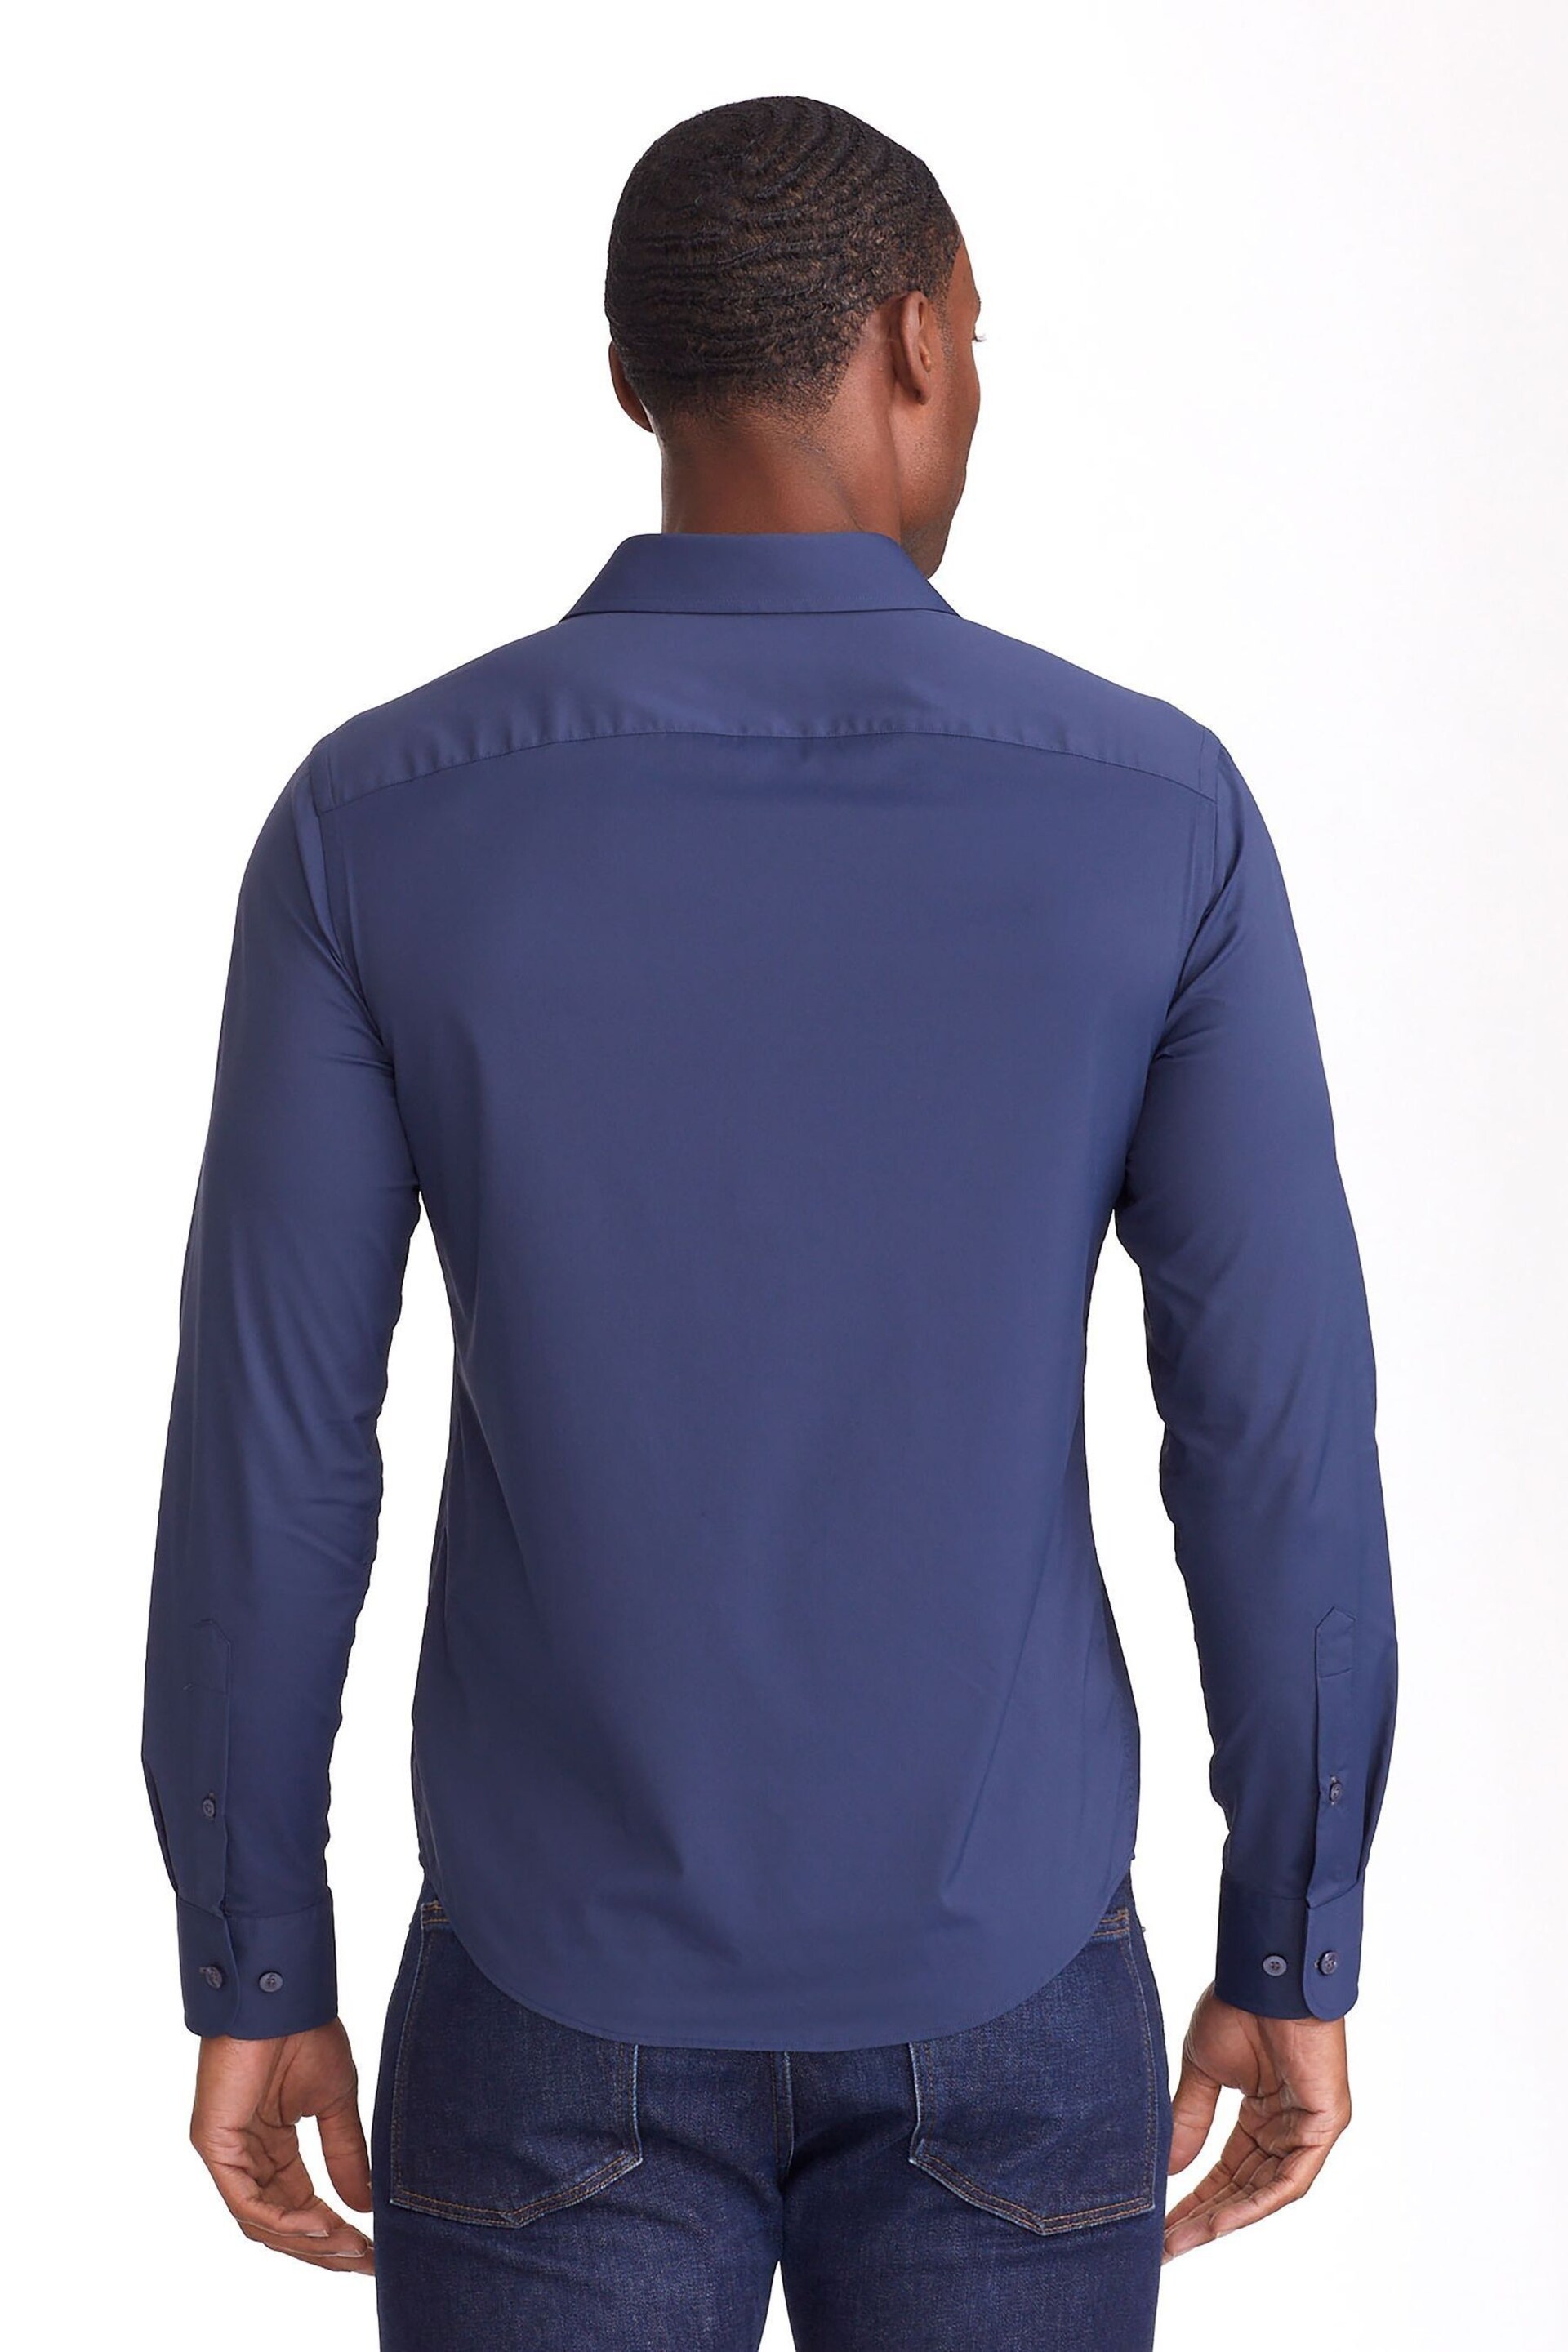 UNTUCKit Blue Wrinkle-Free Performance Relaxed Fit Gironde Shirt - Image 2 of 3